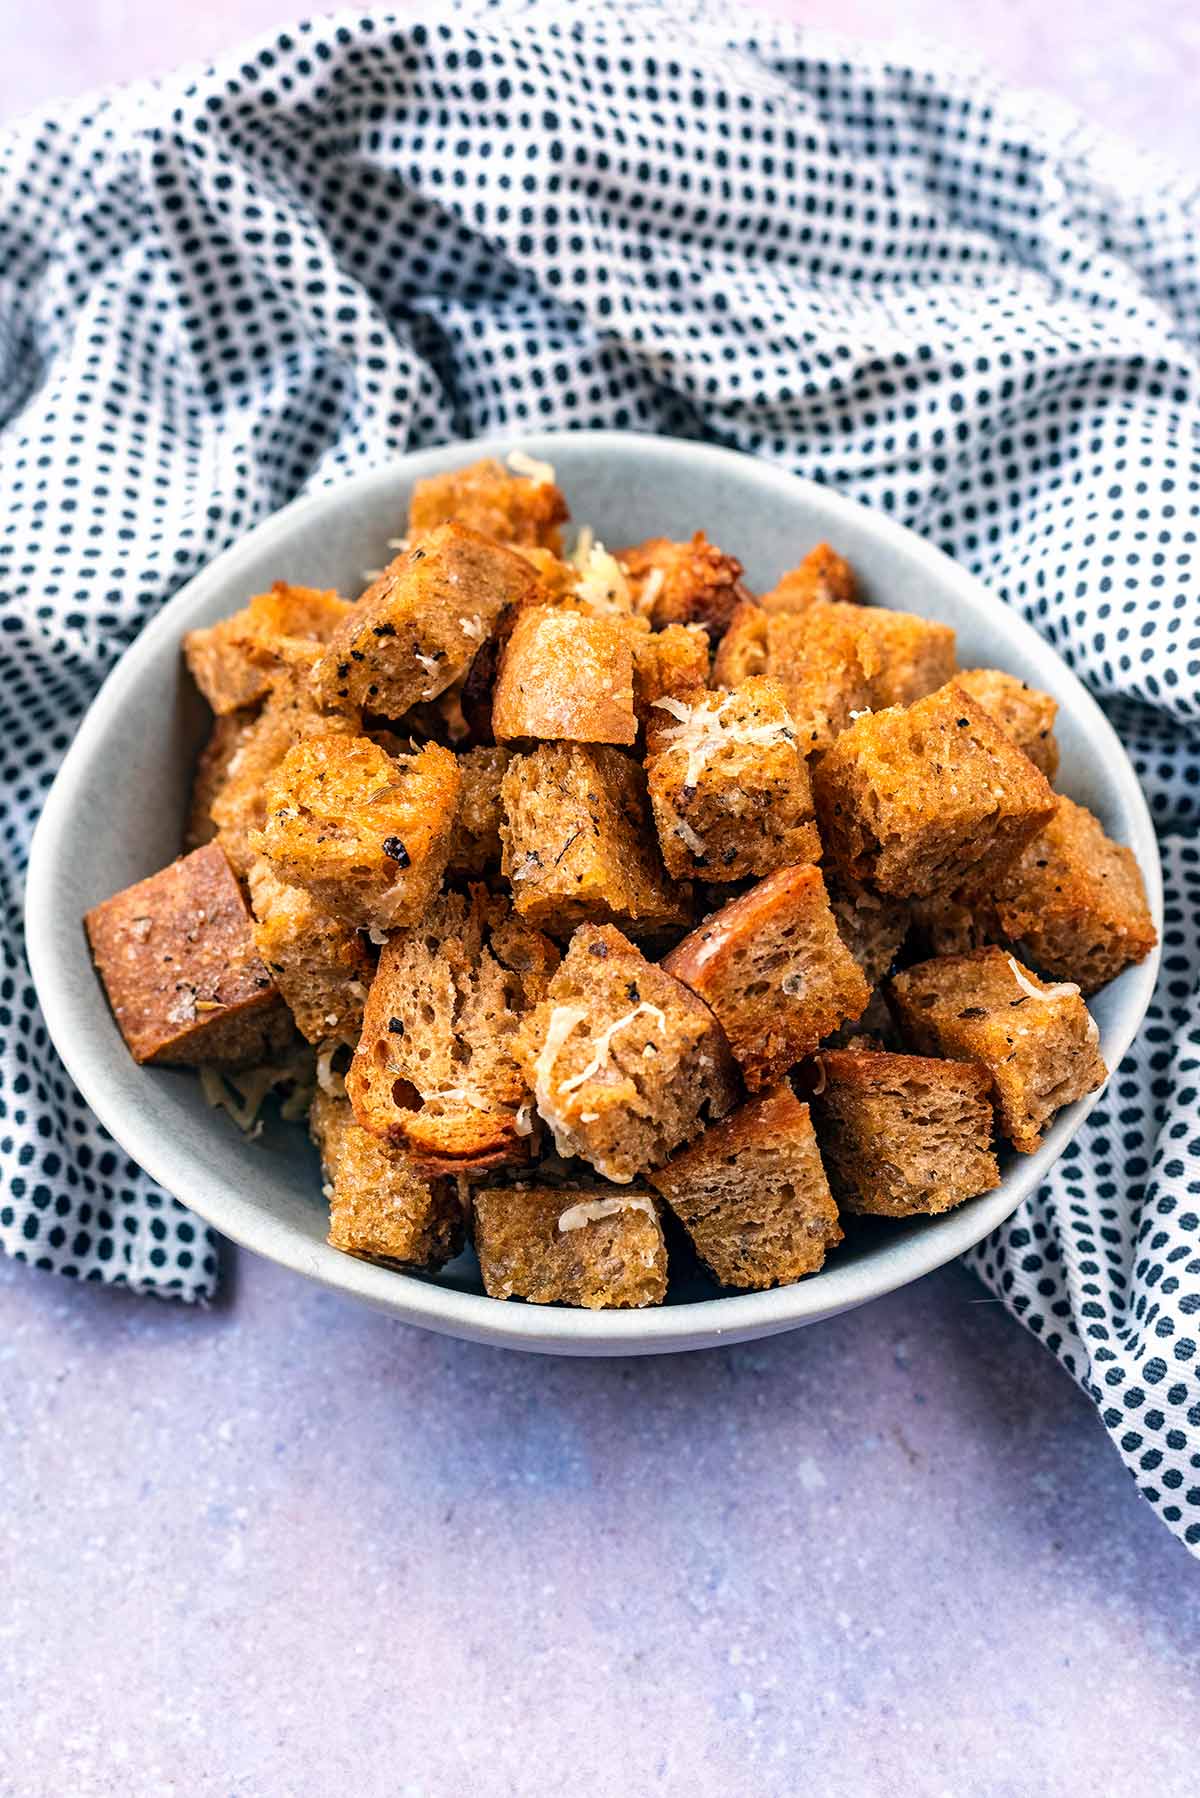 A bowl of croutons in front of a spotted towel.